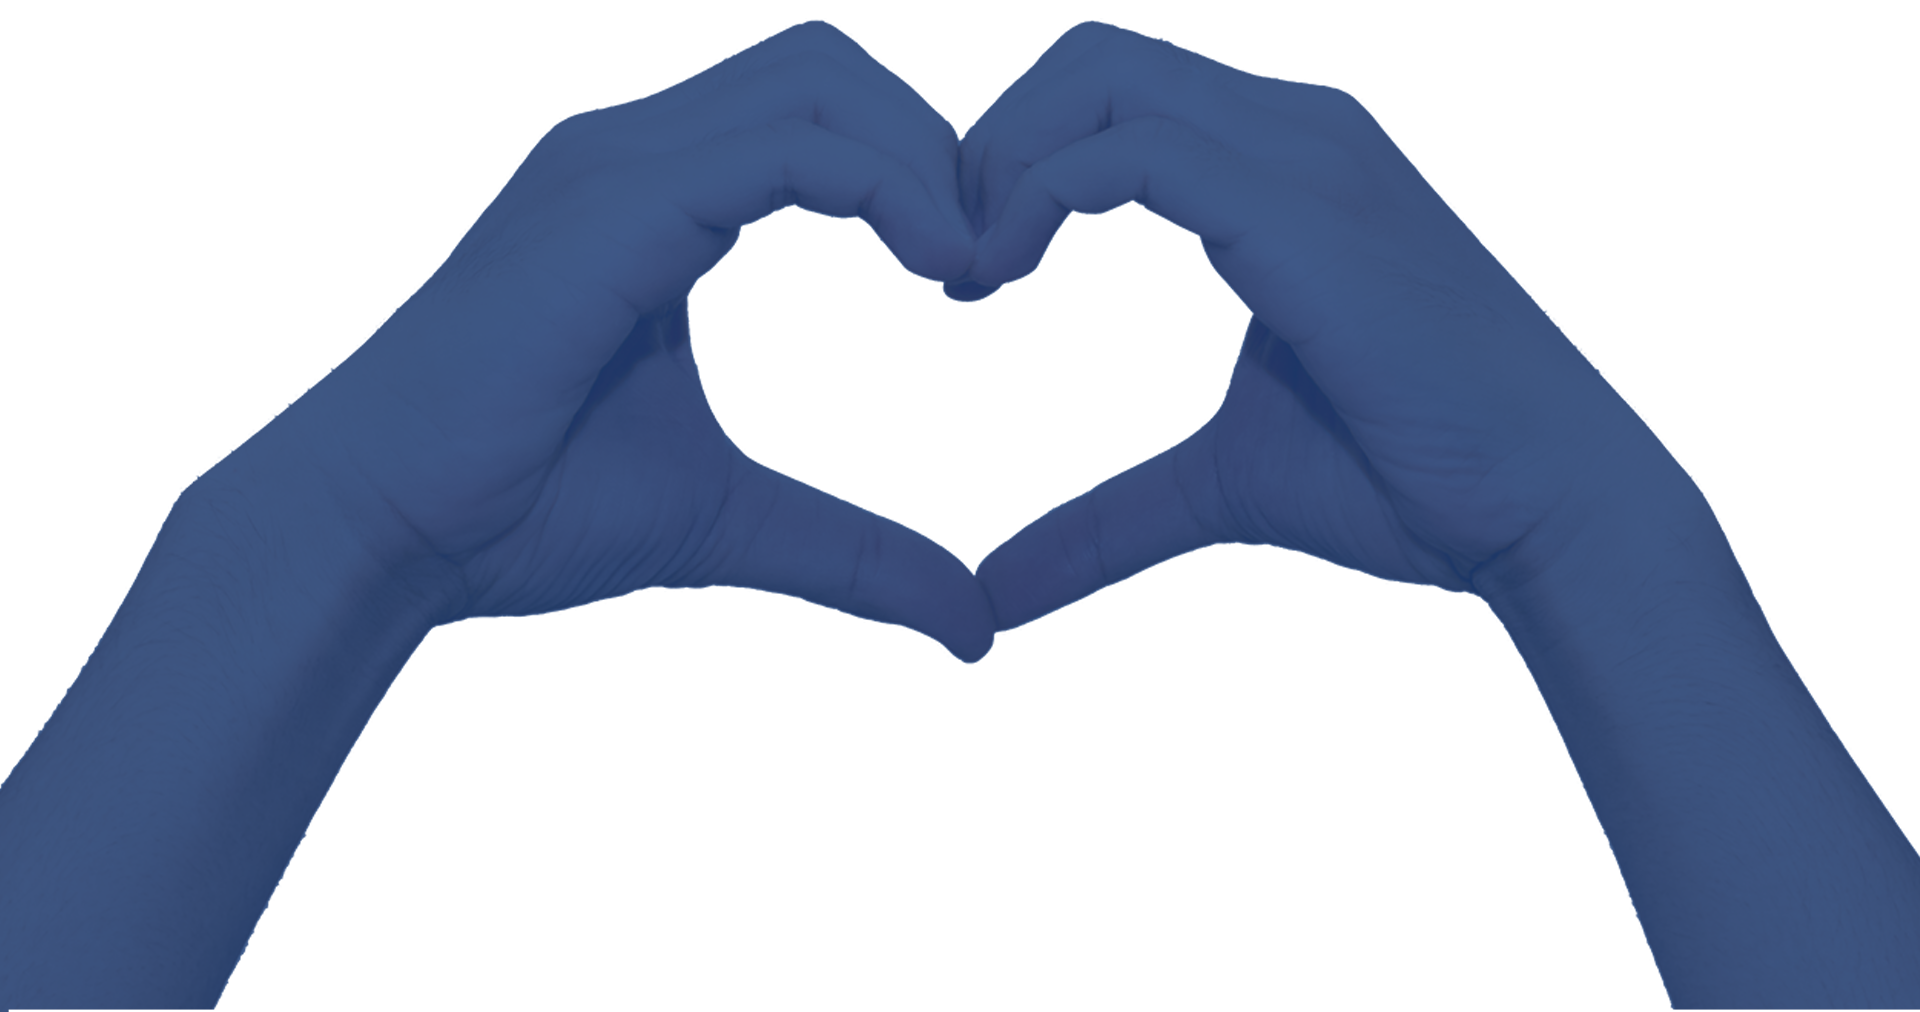 For the Love of Data, written in the middle of two hands forming a heart shape